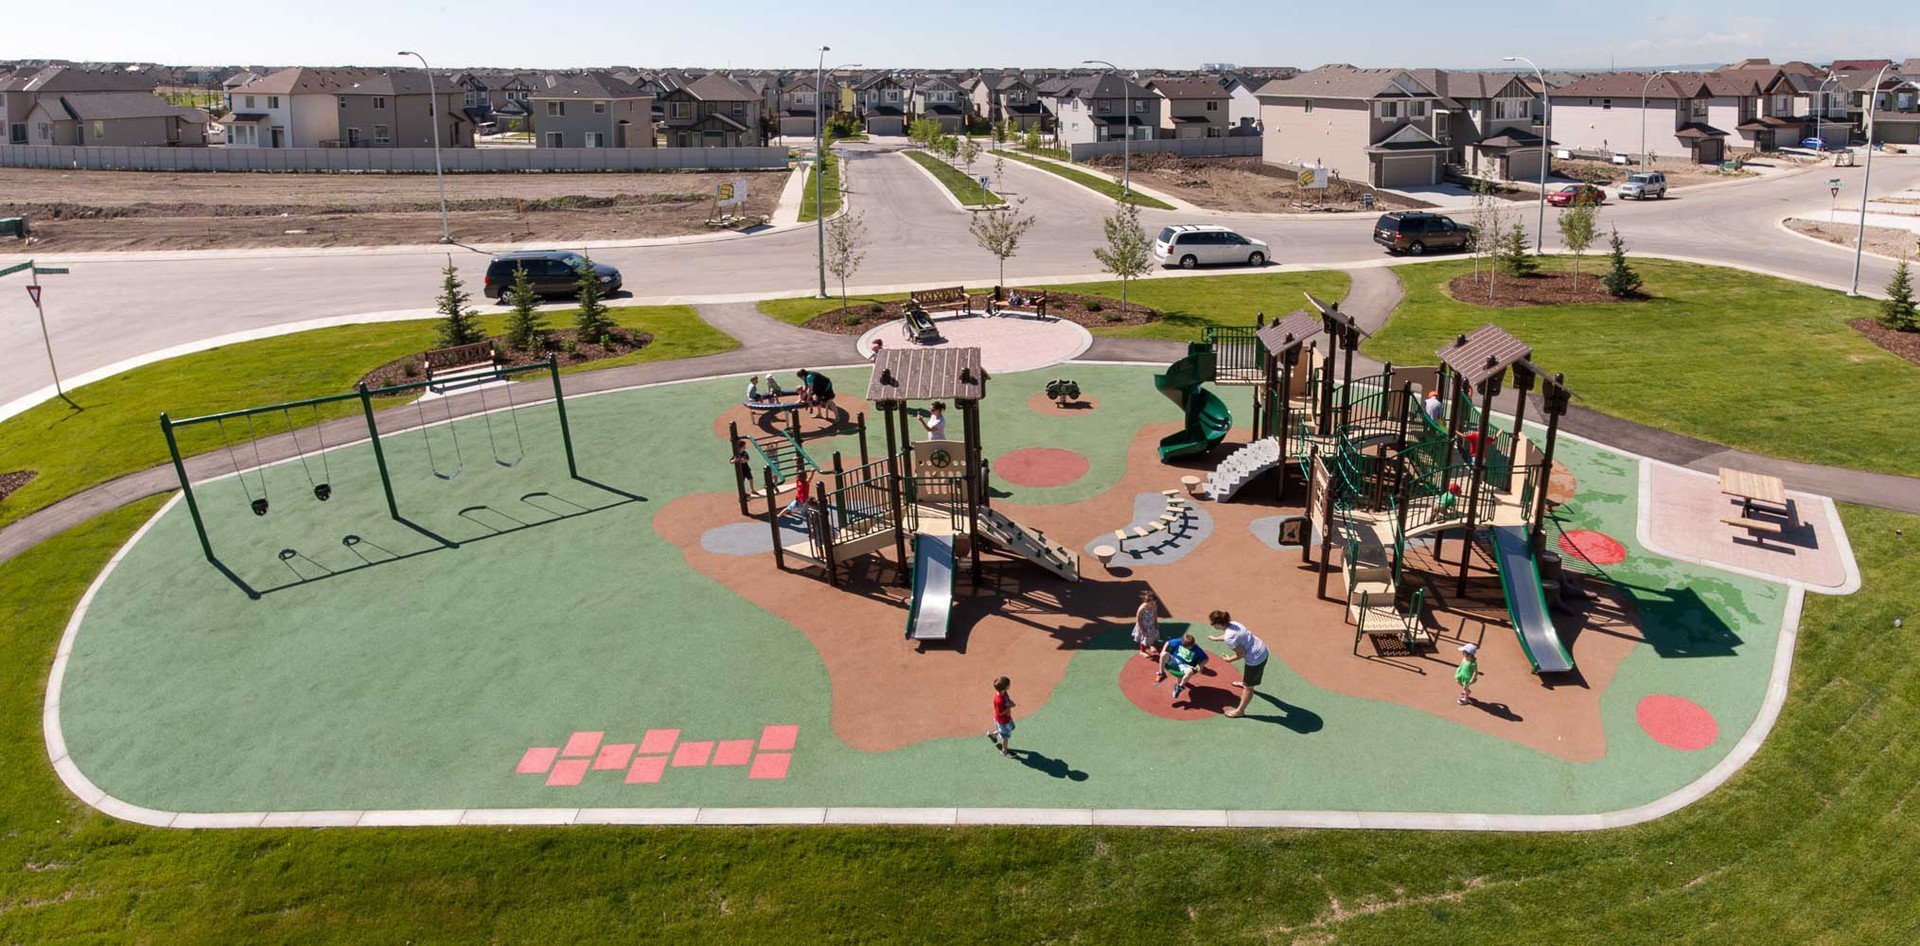 Family-friendly neighborhoods with parks in Calgary